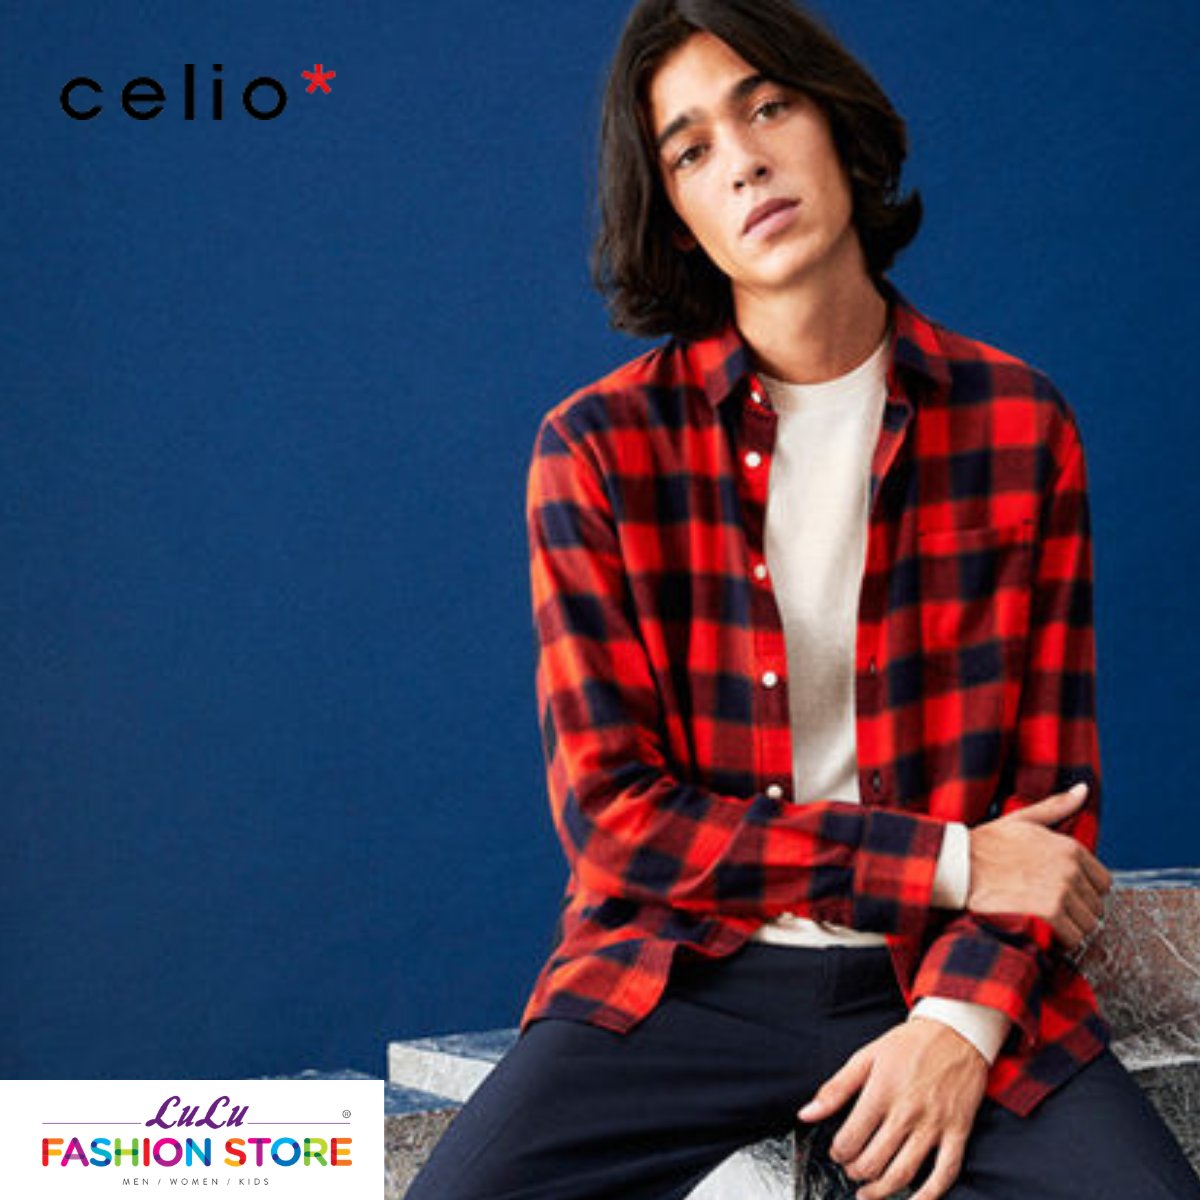 Step up and take control of your style

#LuLuFashionStore 
#CelioIndia 
#Men #MensWorld #MenStyle 
#MenFashionStyle #MenStyleGuide 
#MenFashionTips #MensFashion #MenStyleTips